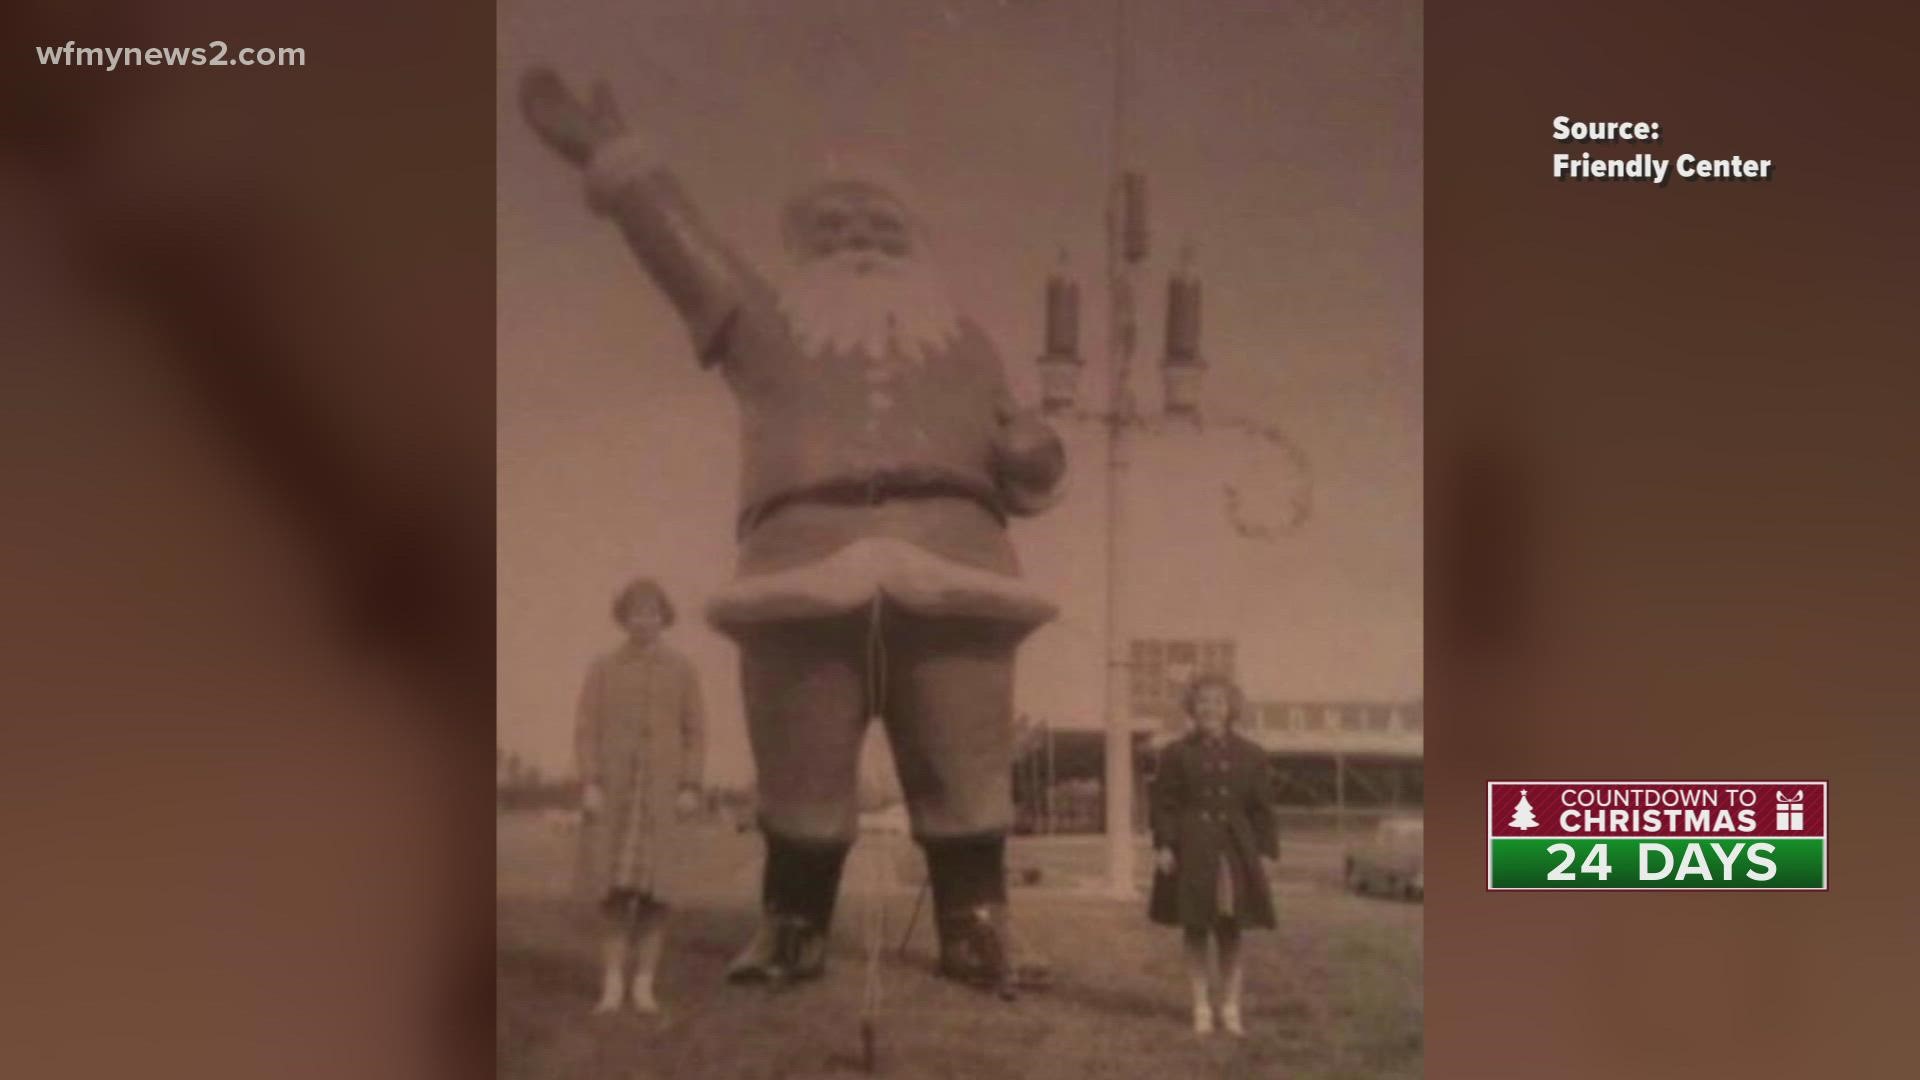 The Waving Santa at the Friendly Center has been an icon for over 62 years.